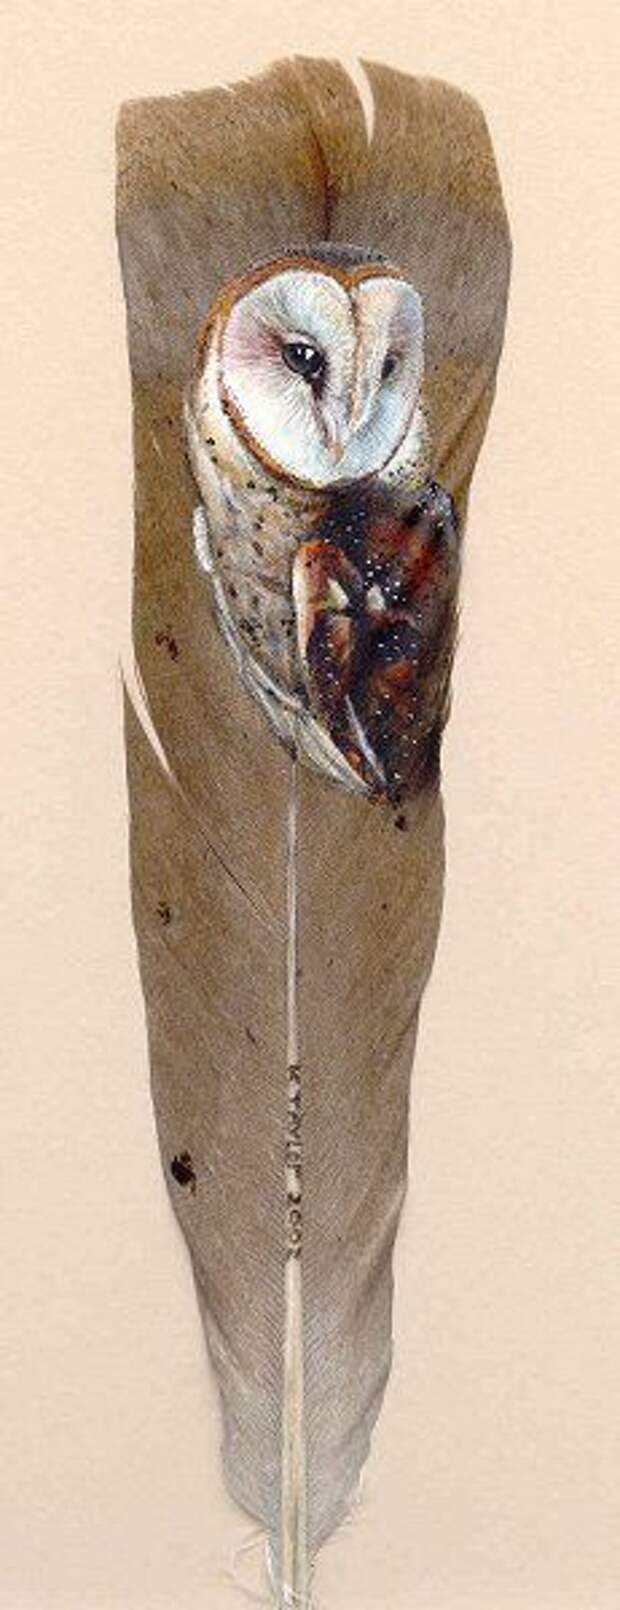 Handpainted feather featuring a barn owl by Karin Taylor Art! Very Lovely!